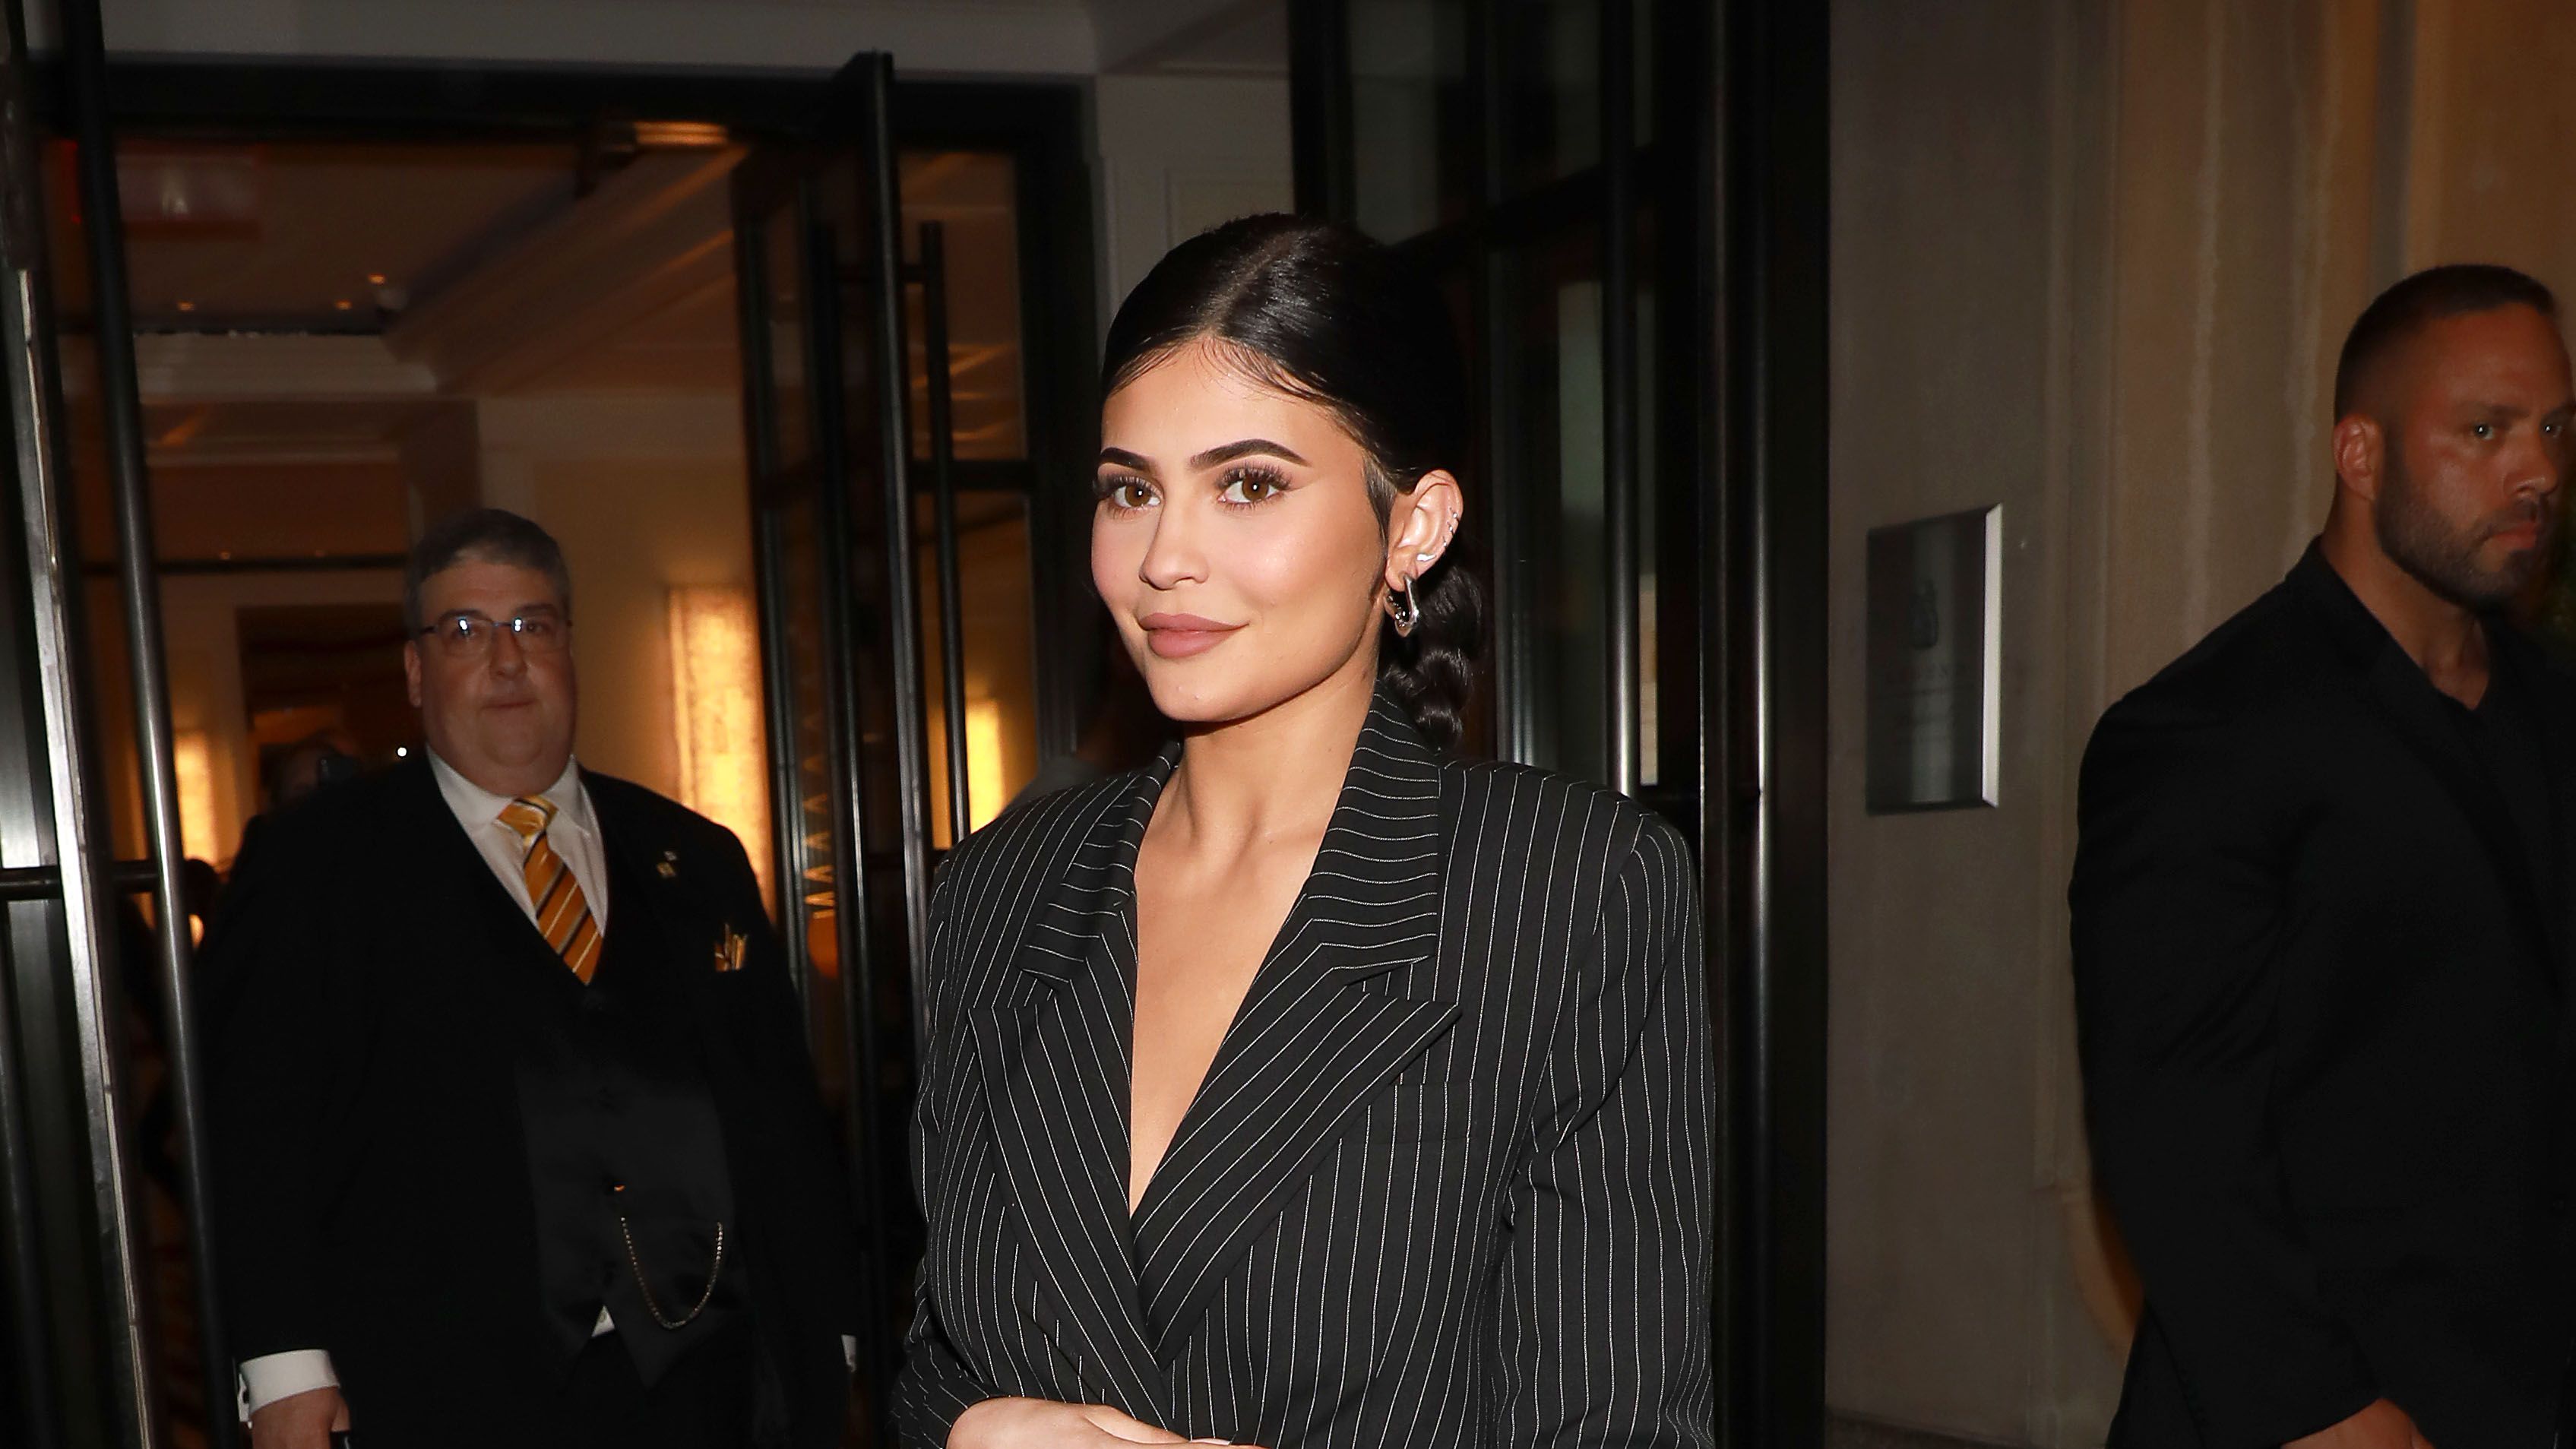 Only Kylie Jenner Can Give A Basic Casual Outfit Her Daringly Chic